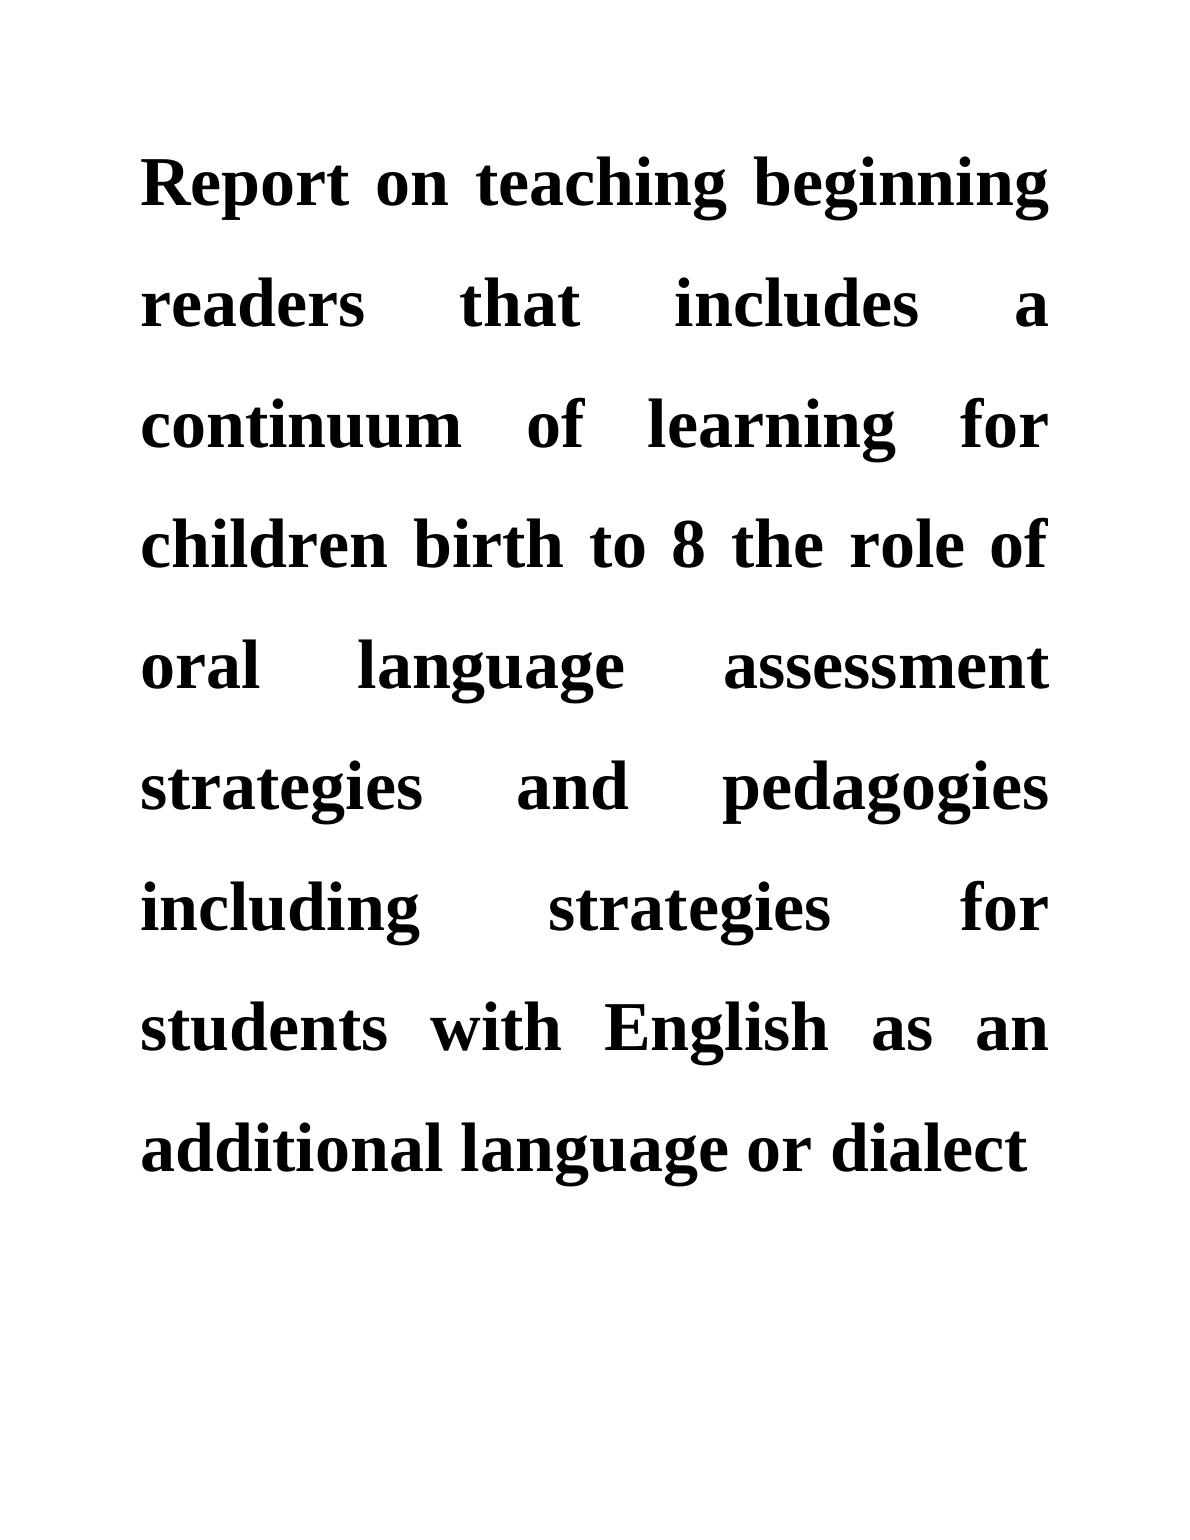 Teaching Beginning Readers: A Continuum of Learning for Children Birth to 8_1